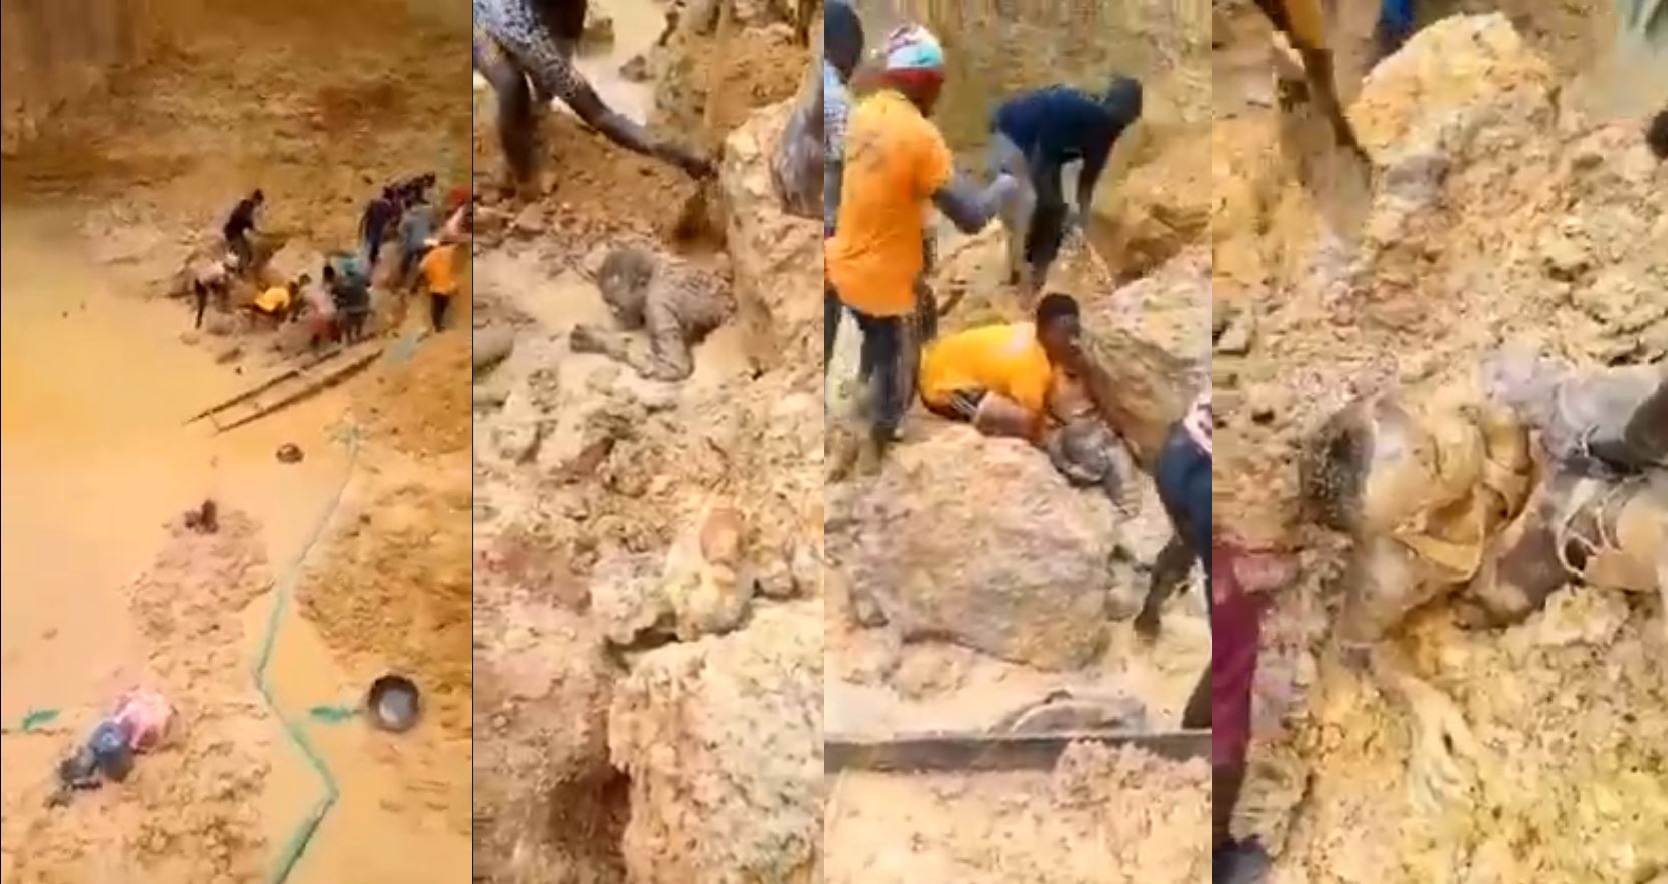 Unknown Number of Sierra Leoneans Trapped Under The Ground as Another Tragic Mudslide Occurs